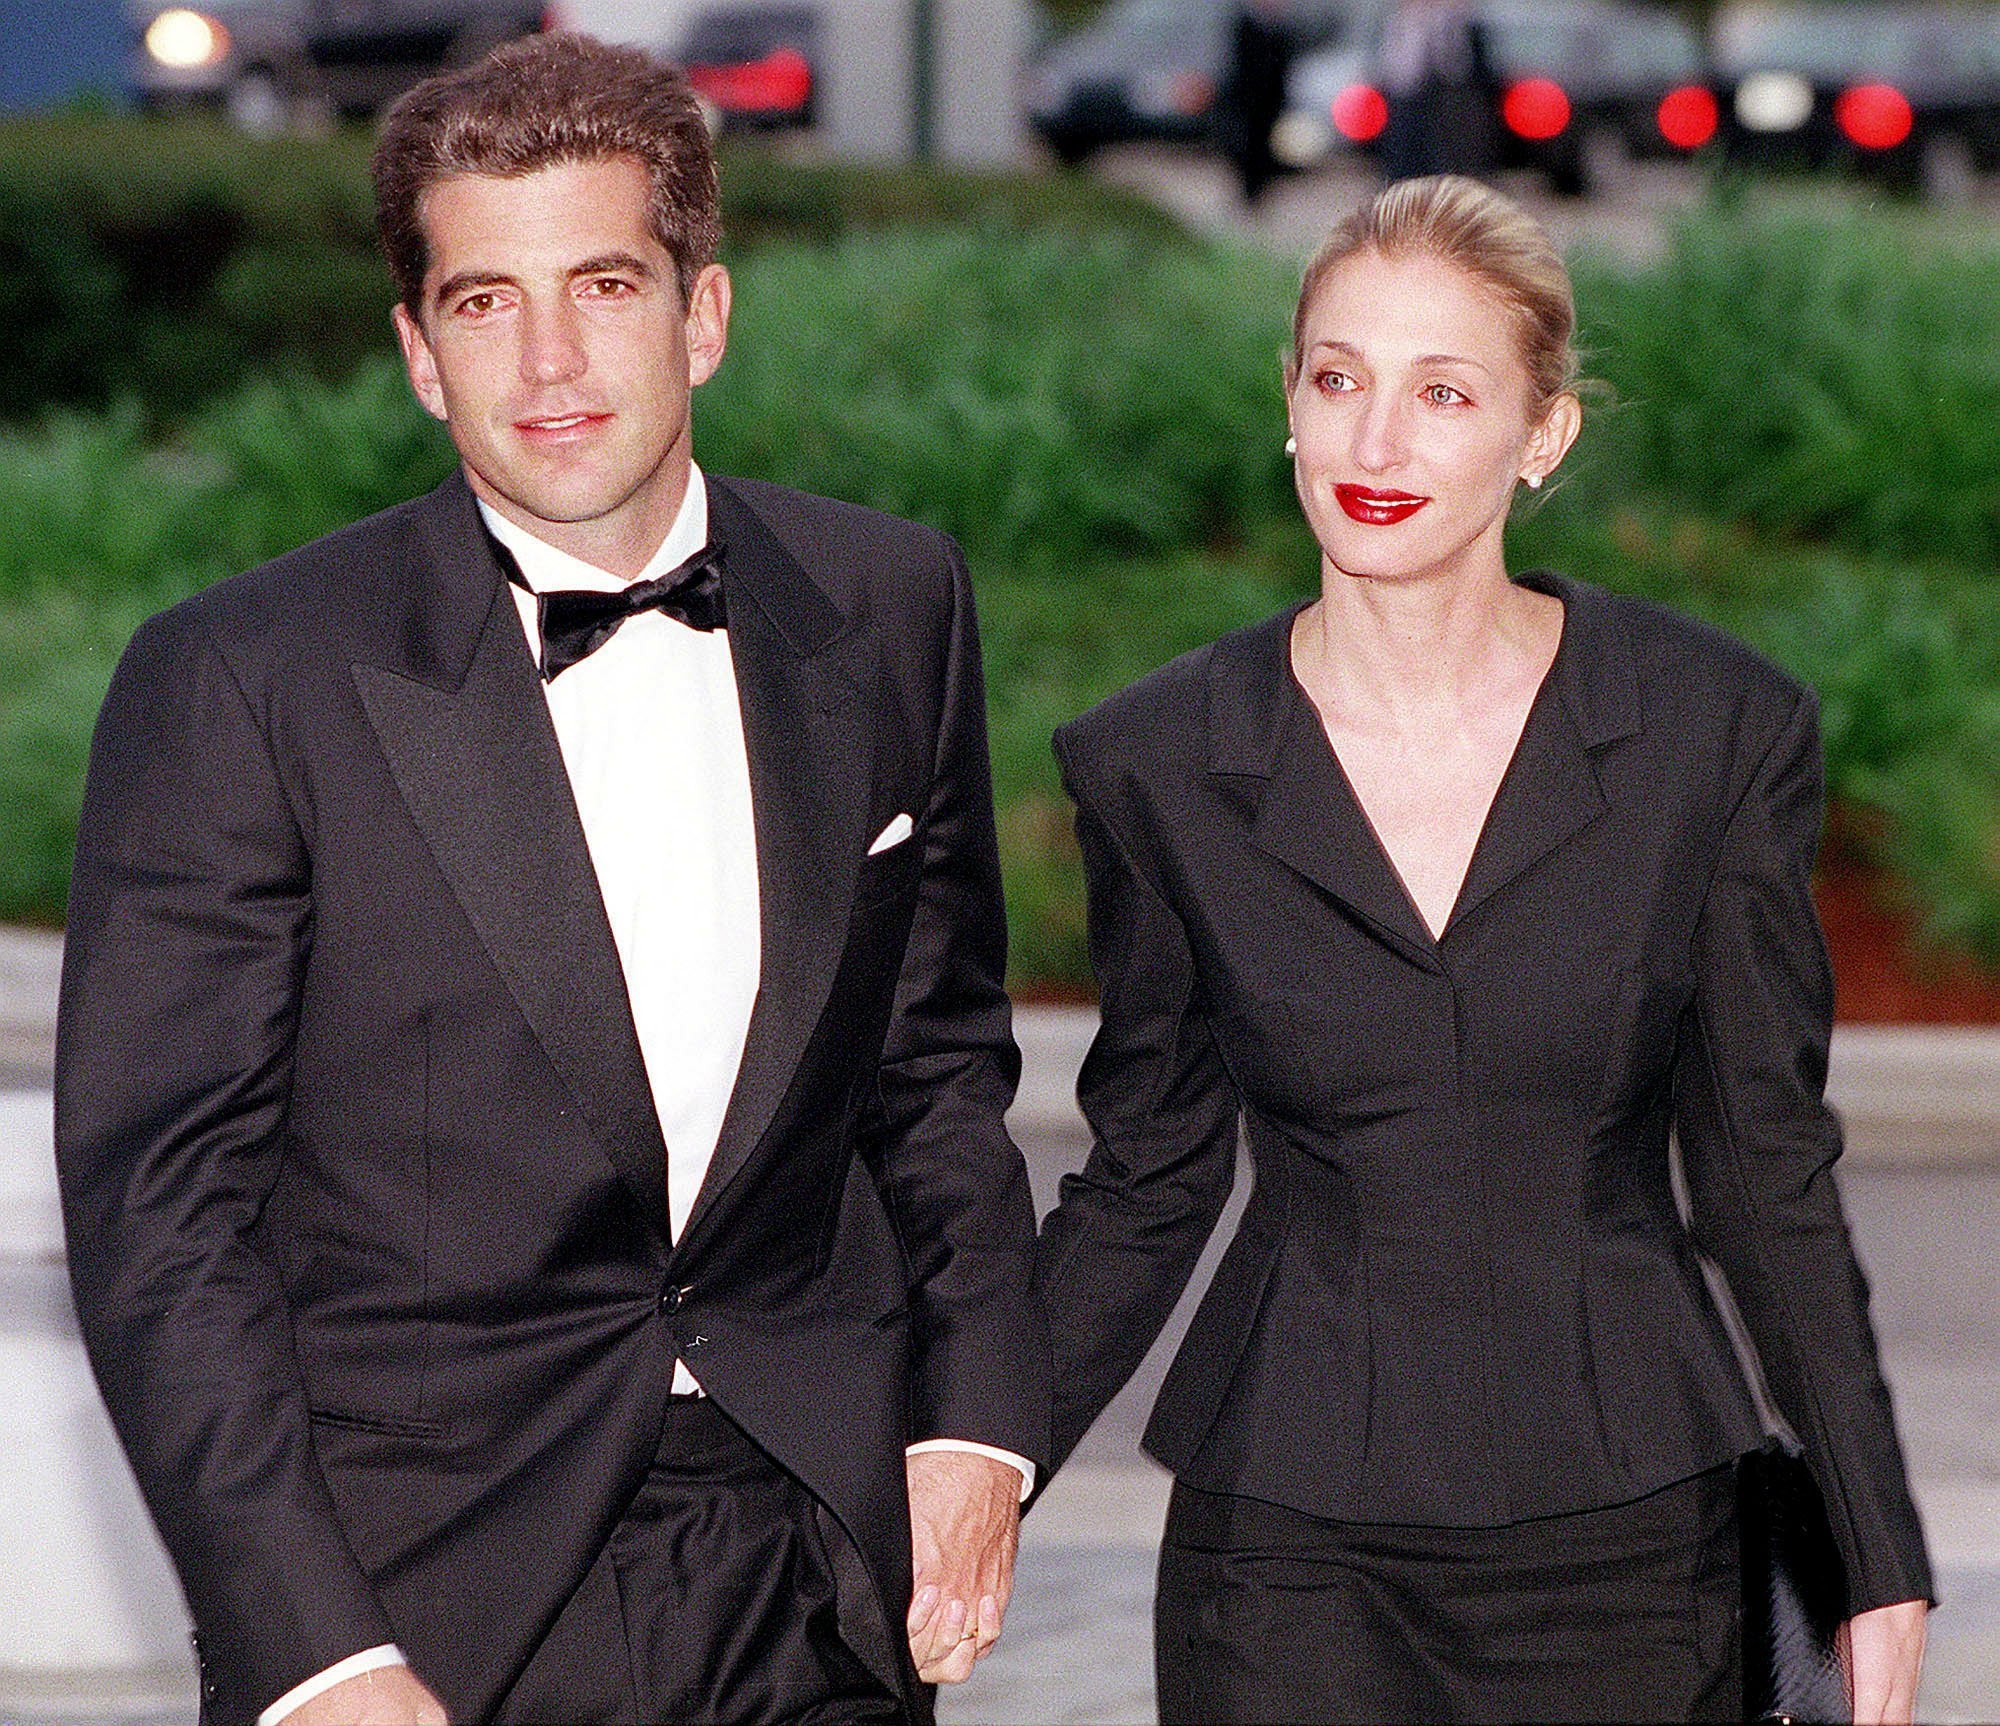 John F. Kennedy, Jr. and his wife Carolyn Bessette Kennedy arrive at the annual John F. Kennedy Library Foundation dinner on May 23, 1999. | Source: Getty Images